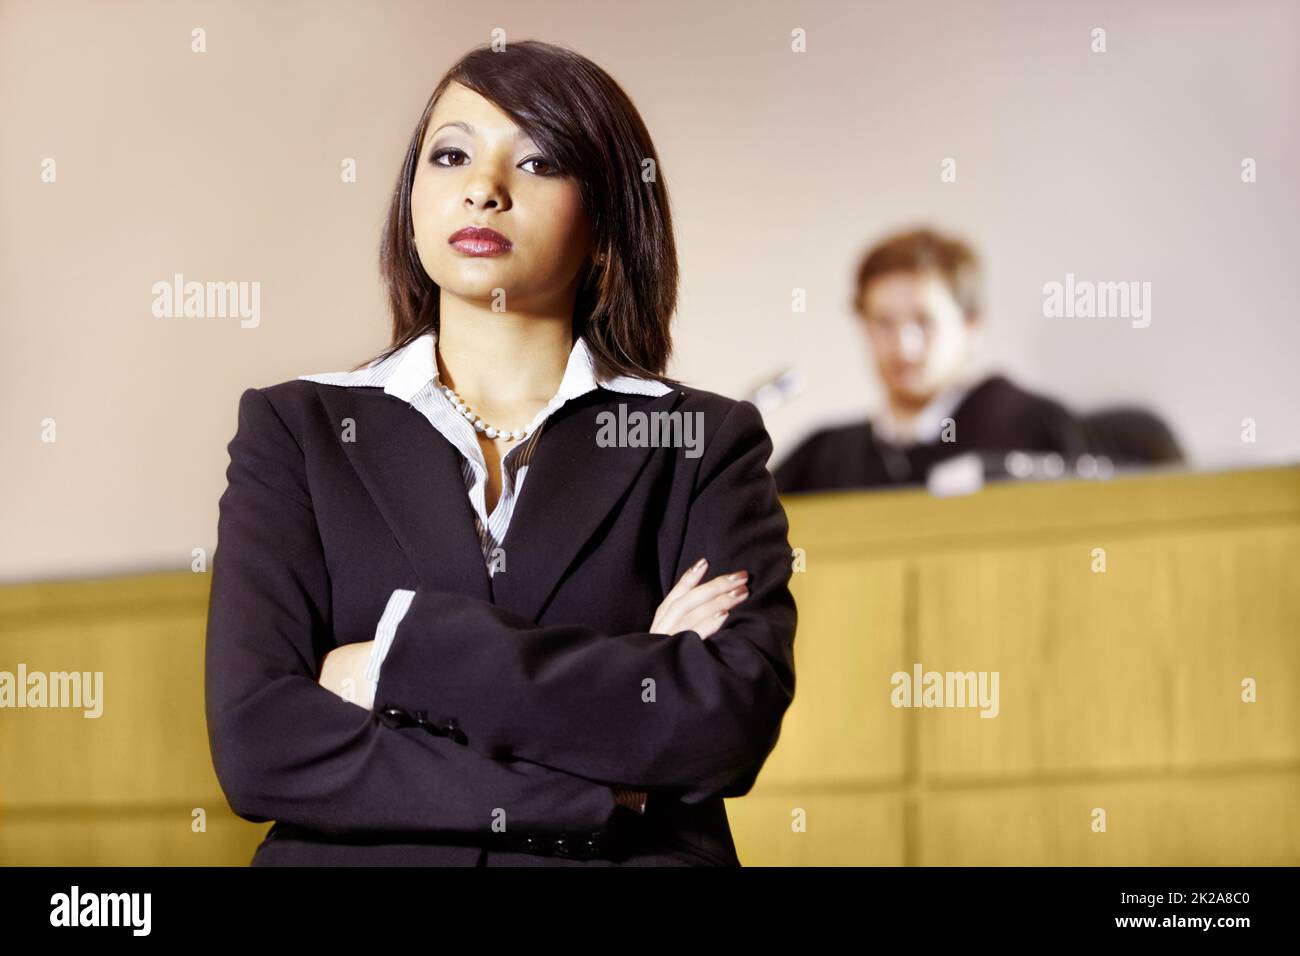 Well-qualified to win in court. Stern young advocate standing in the courtroom with her arms folded. Stock Photo